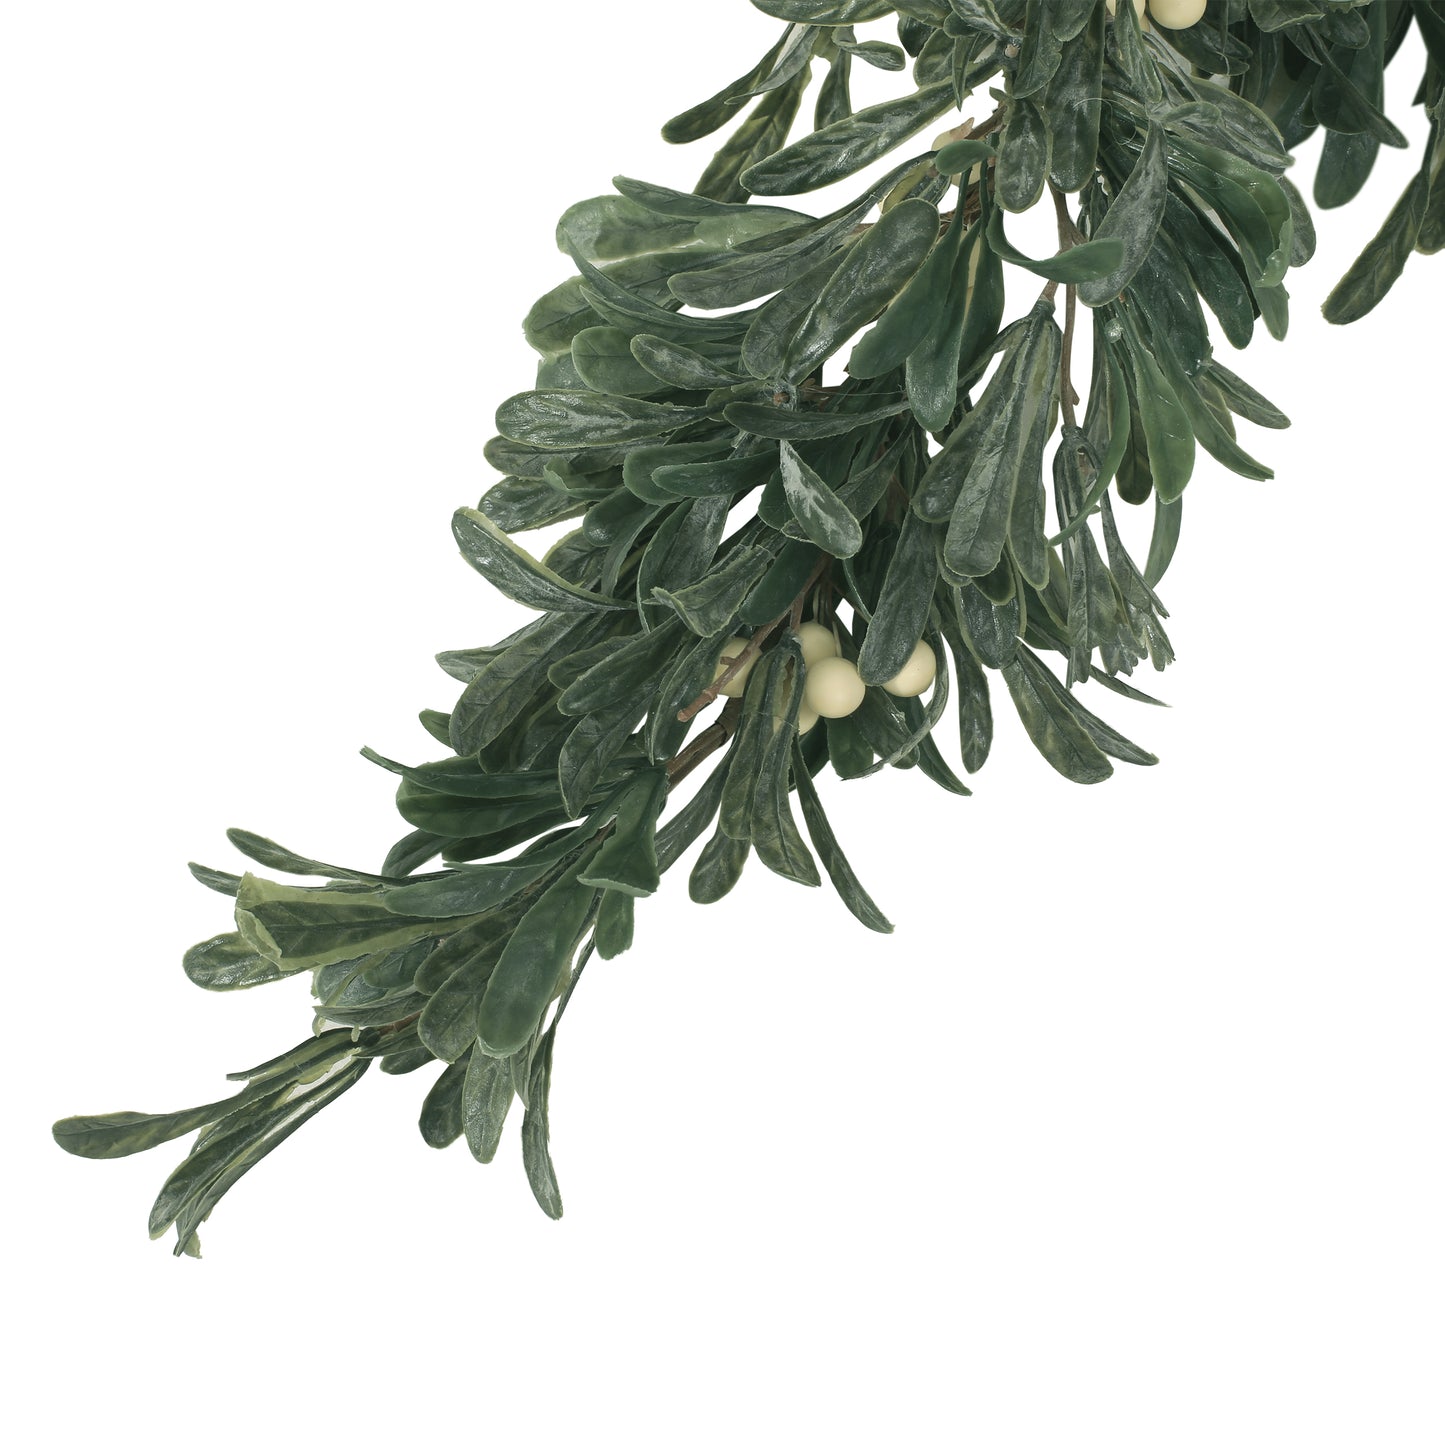 Mina 4.5-foot Snowberry Artificial Garland, Green and White